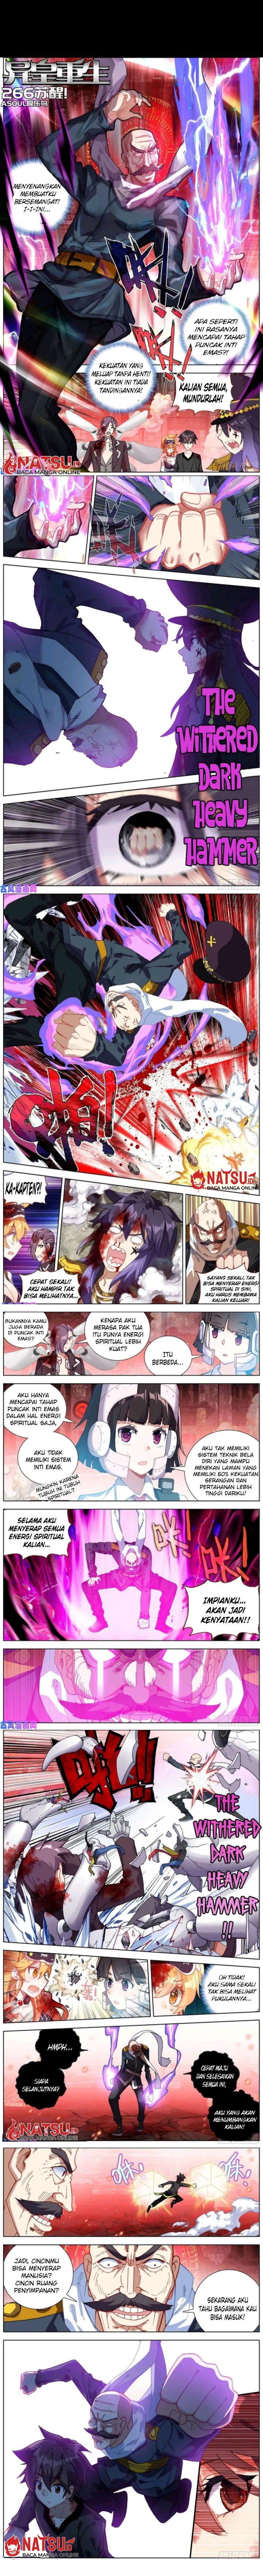 Different Kings Chapter 266 - 27